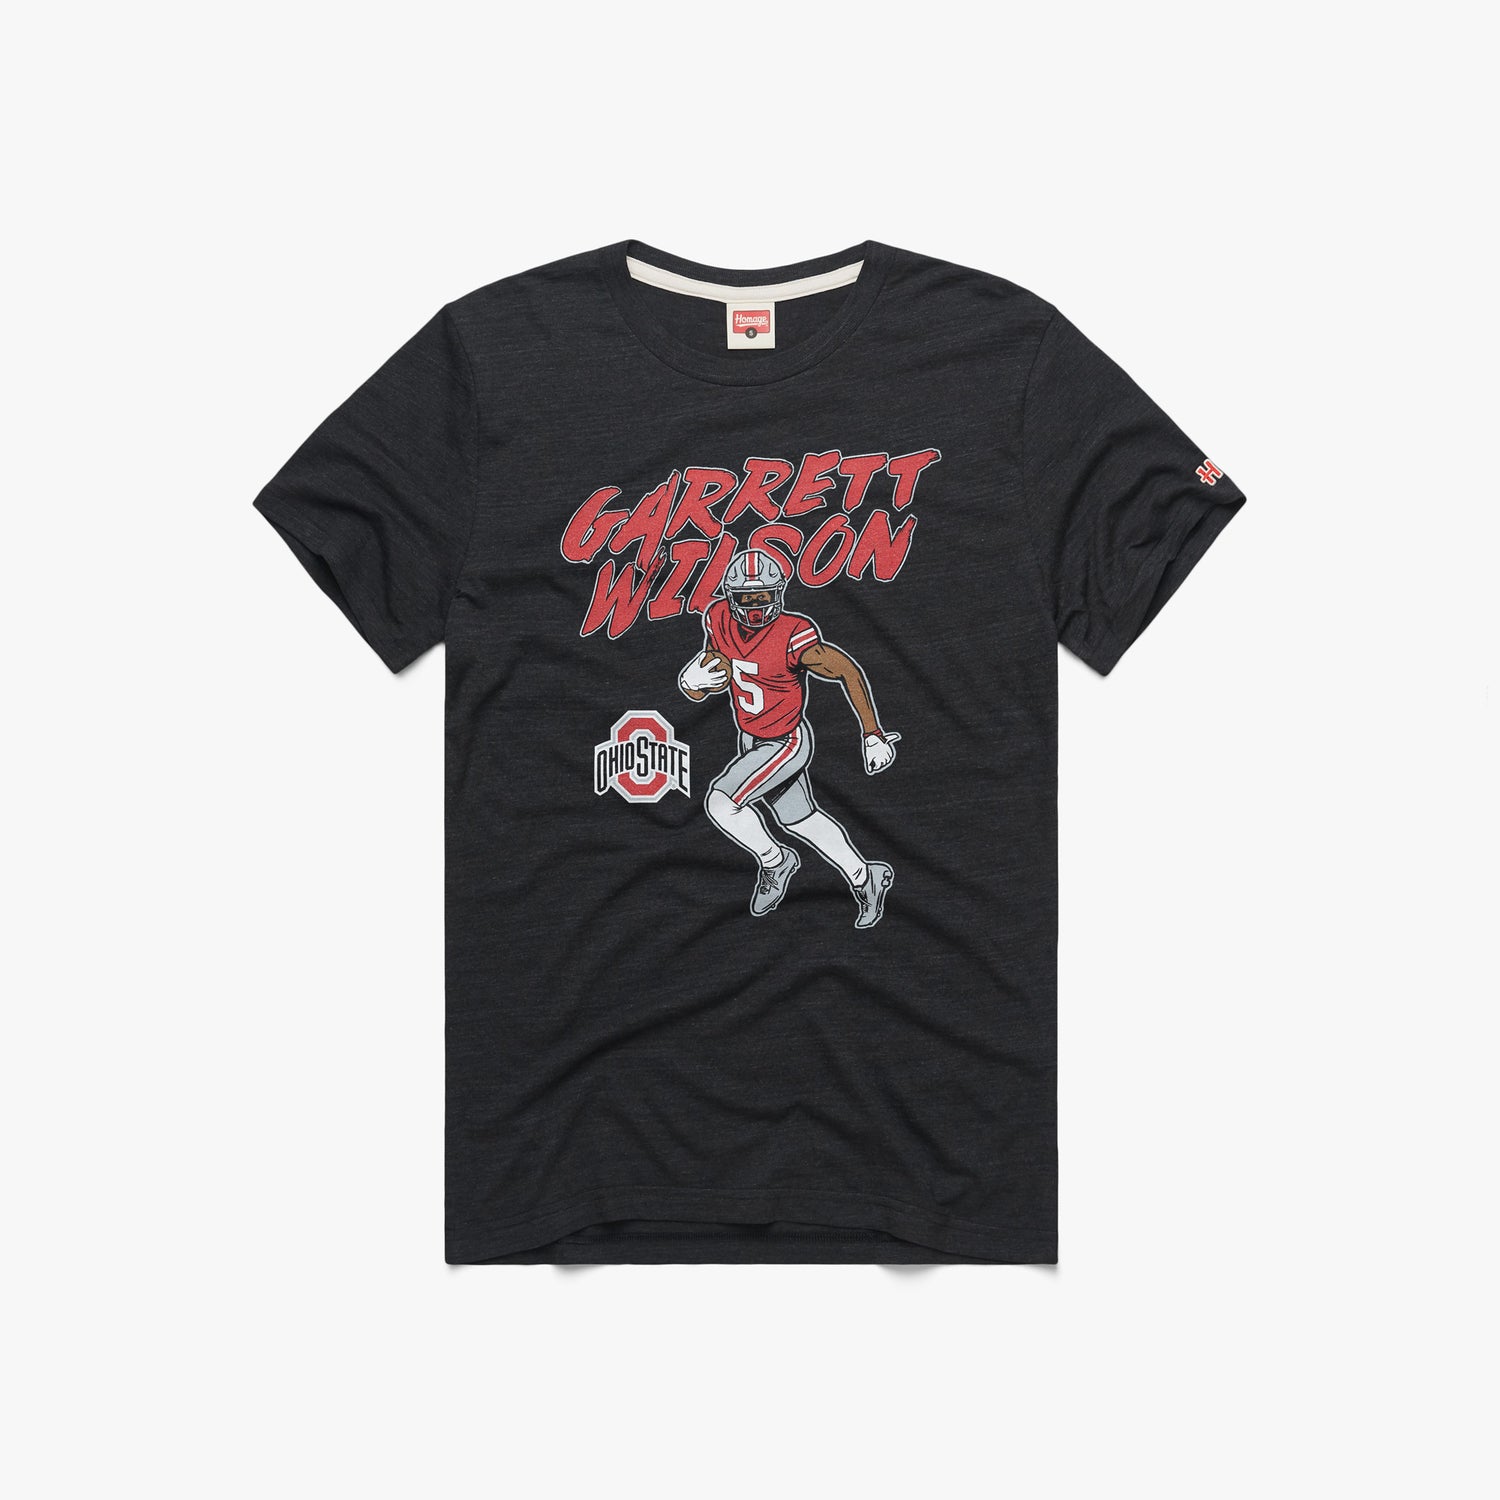 Garrett Wilson Ohio State T-Shirt from Homage. | Officially Licensed Ohio State Gear | Charcoal | Ohio State Vintage Apparel from Homage.